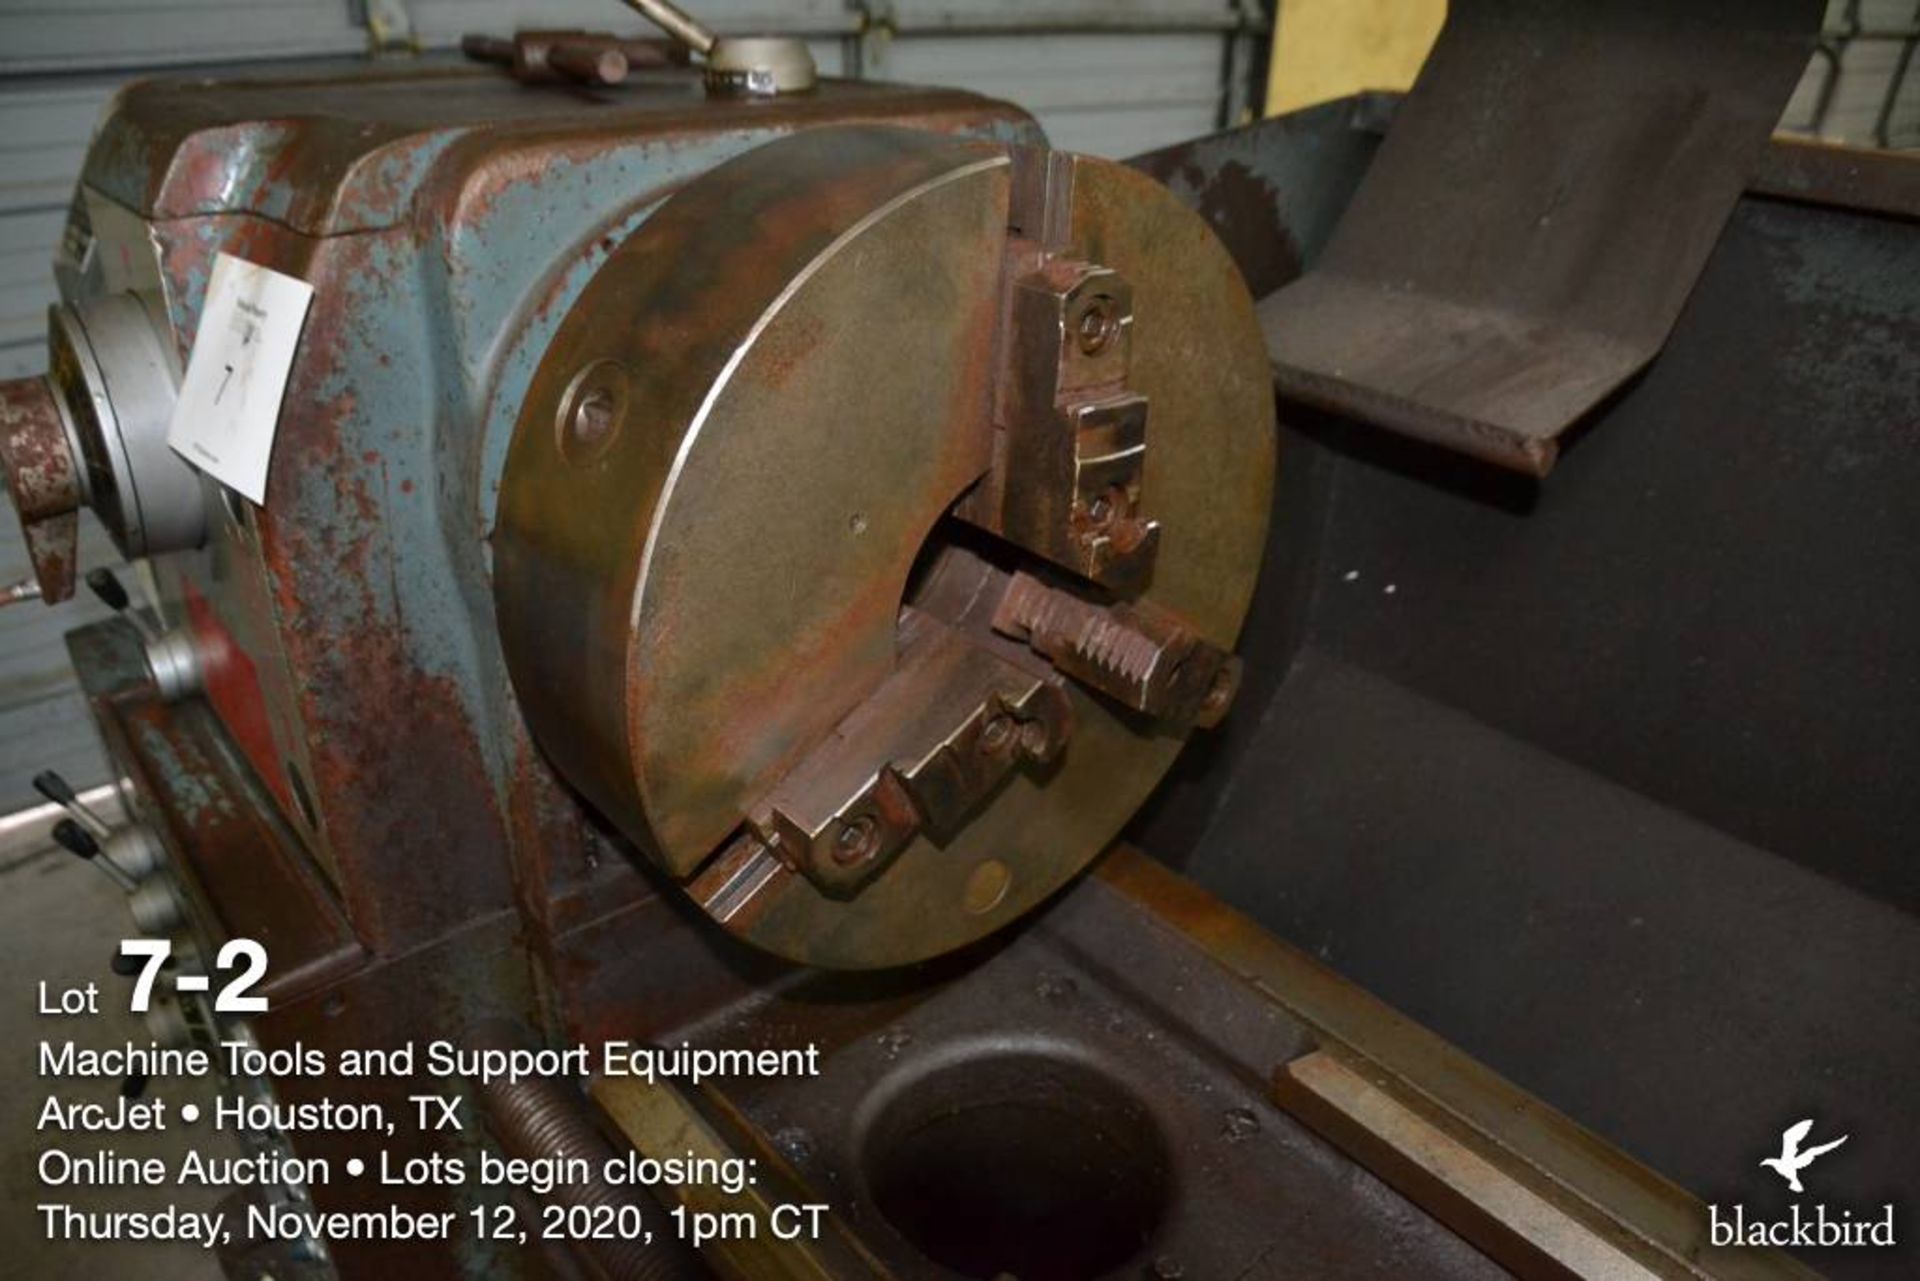 Engine lathe, Kingston HD 2290, 22 in x 90 in, metric & SAE threading, spindle bore 4 1/8 in, 2007 - Image 3 of 12